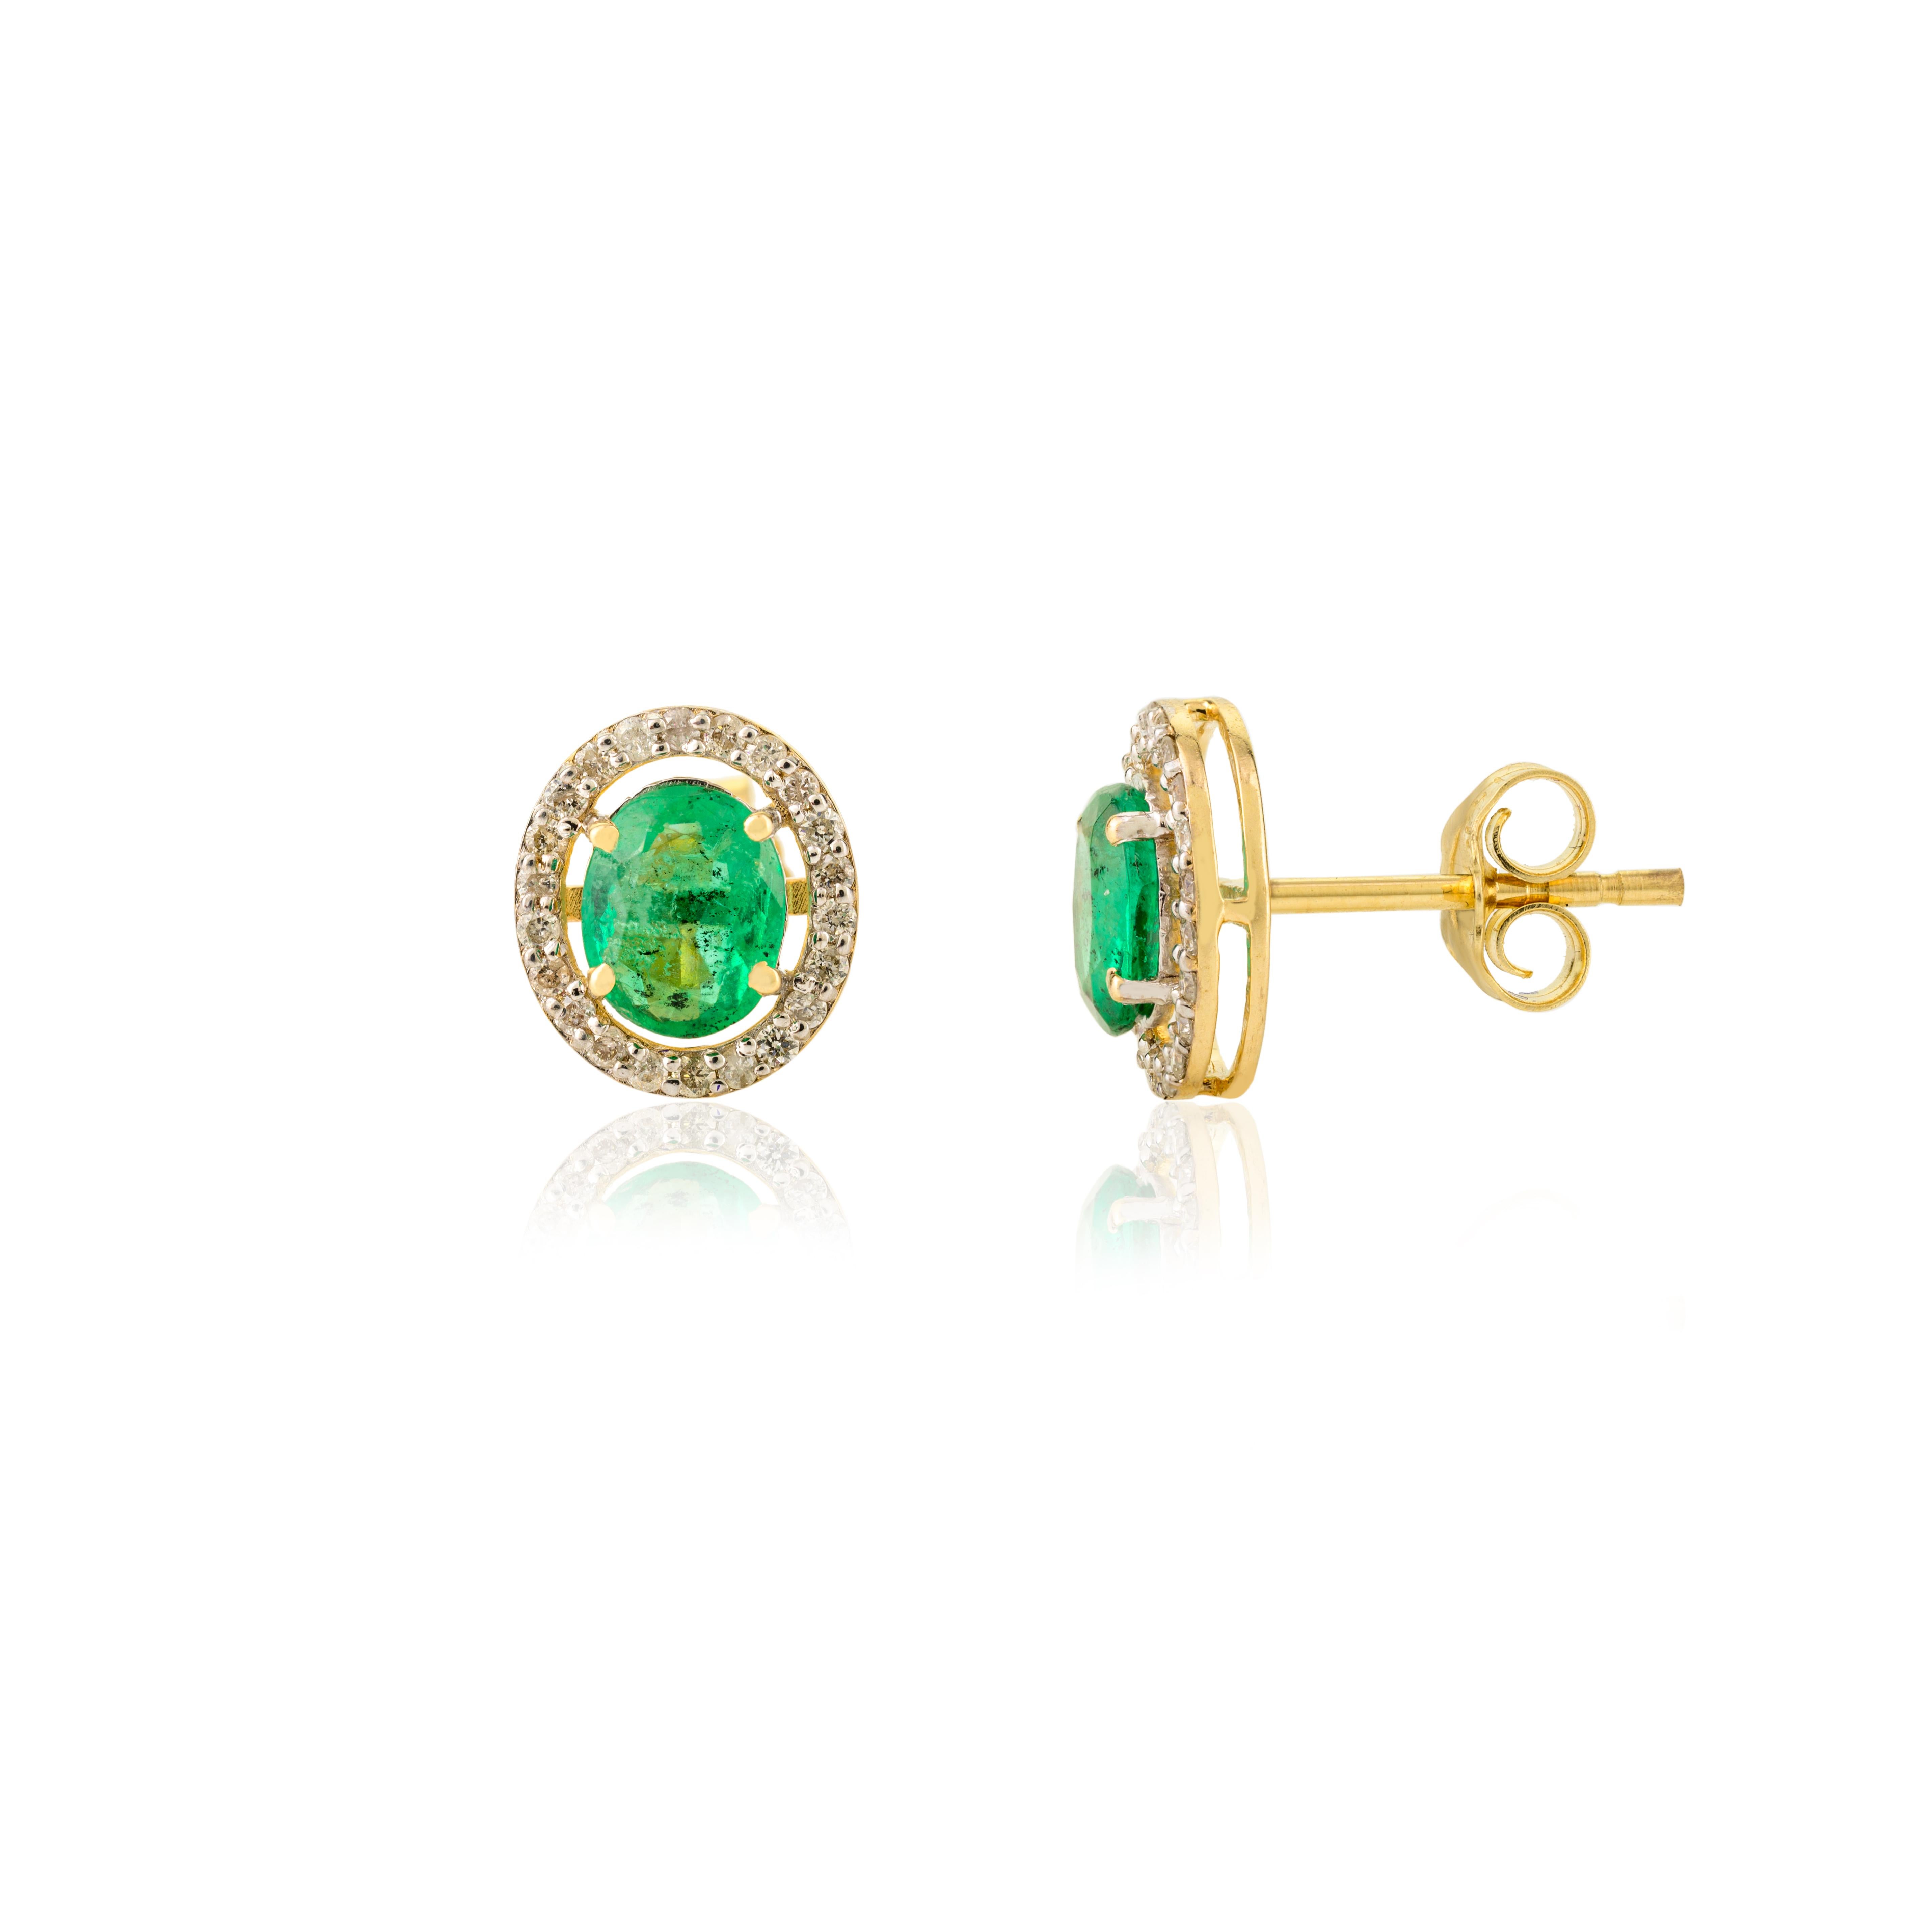 14k Yellow Gold Genuine Emerald Diamond Halo Stud Earrings Gift for Her In New Condition For Sale In Houston, TX